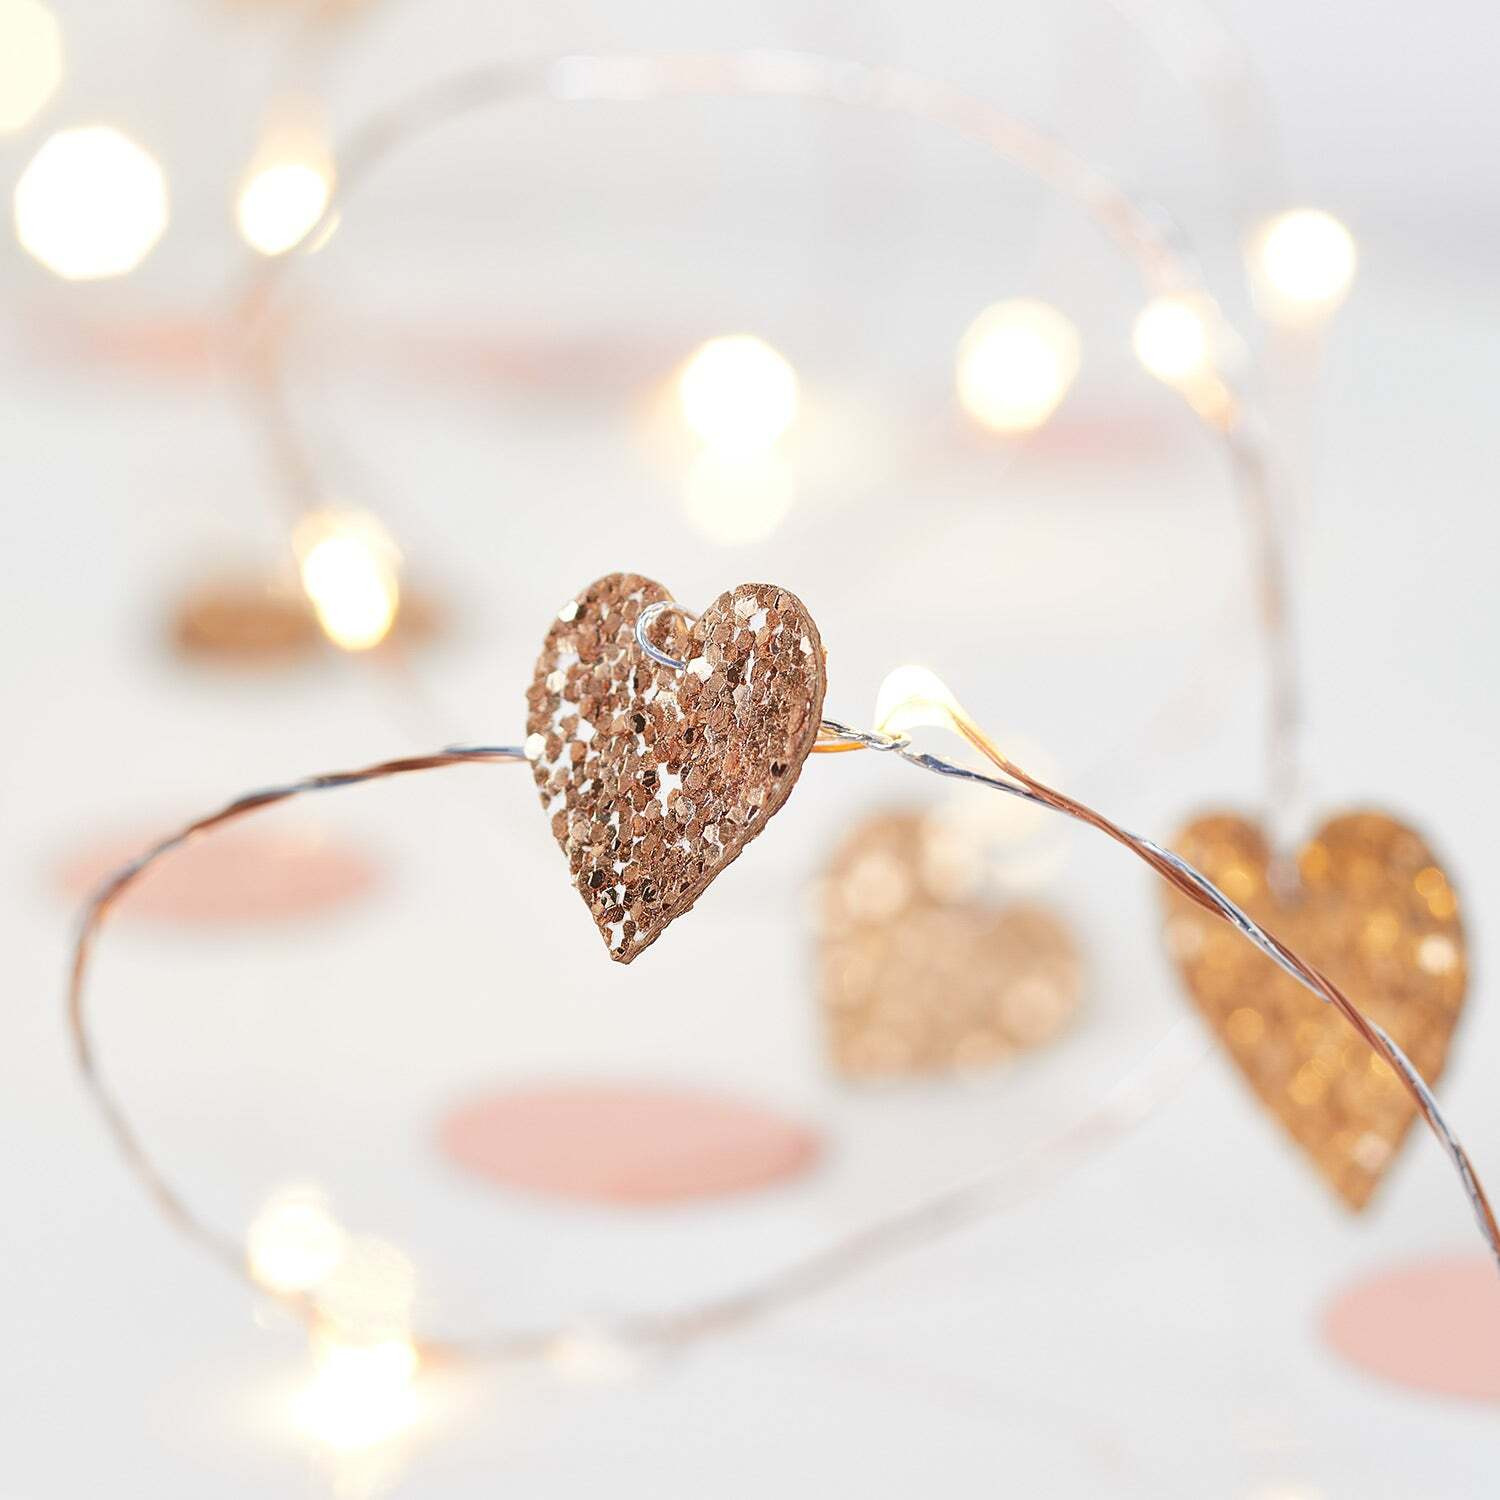 20 Rose Gold Heart Micro Fairy Lights - image 1